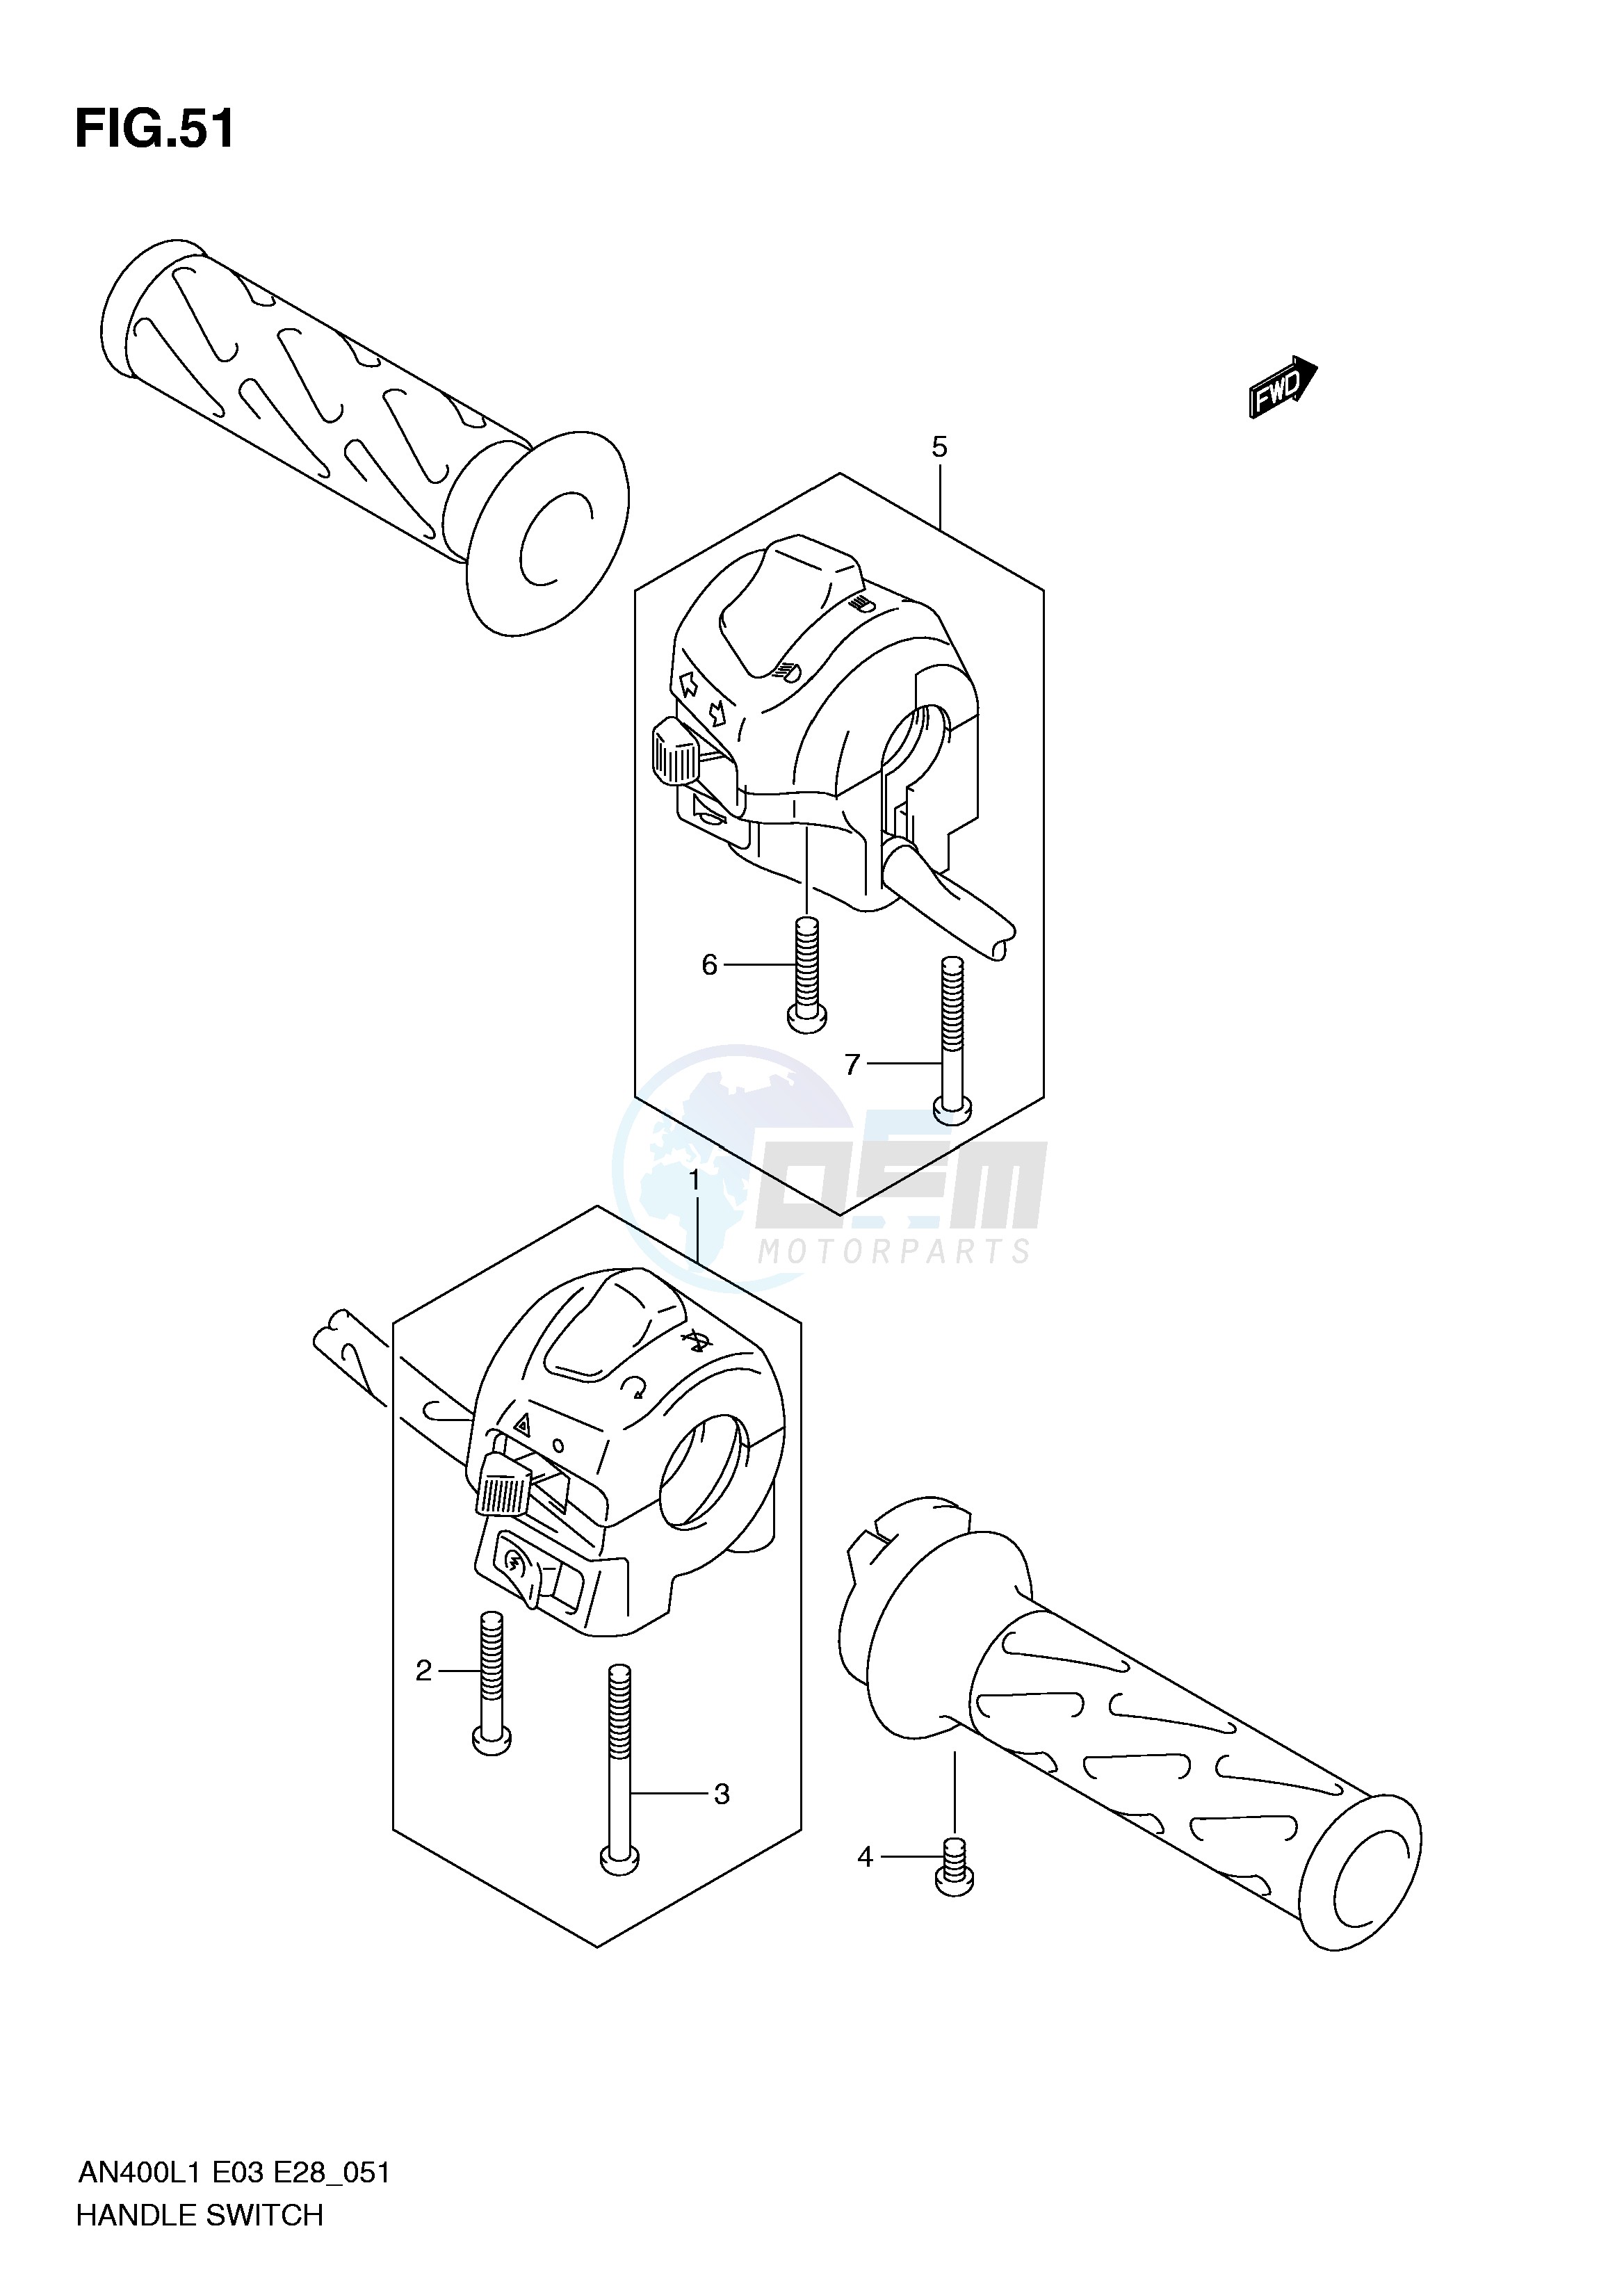 HANDLE SWITCH (AN400L1 E33) image